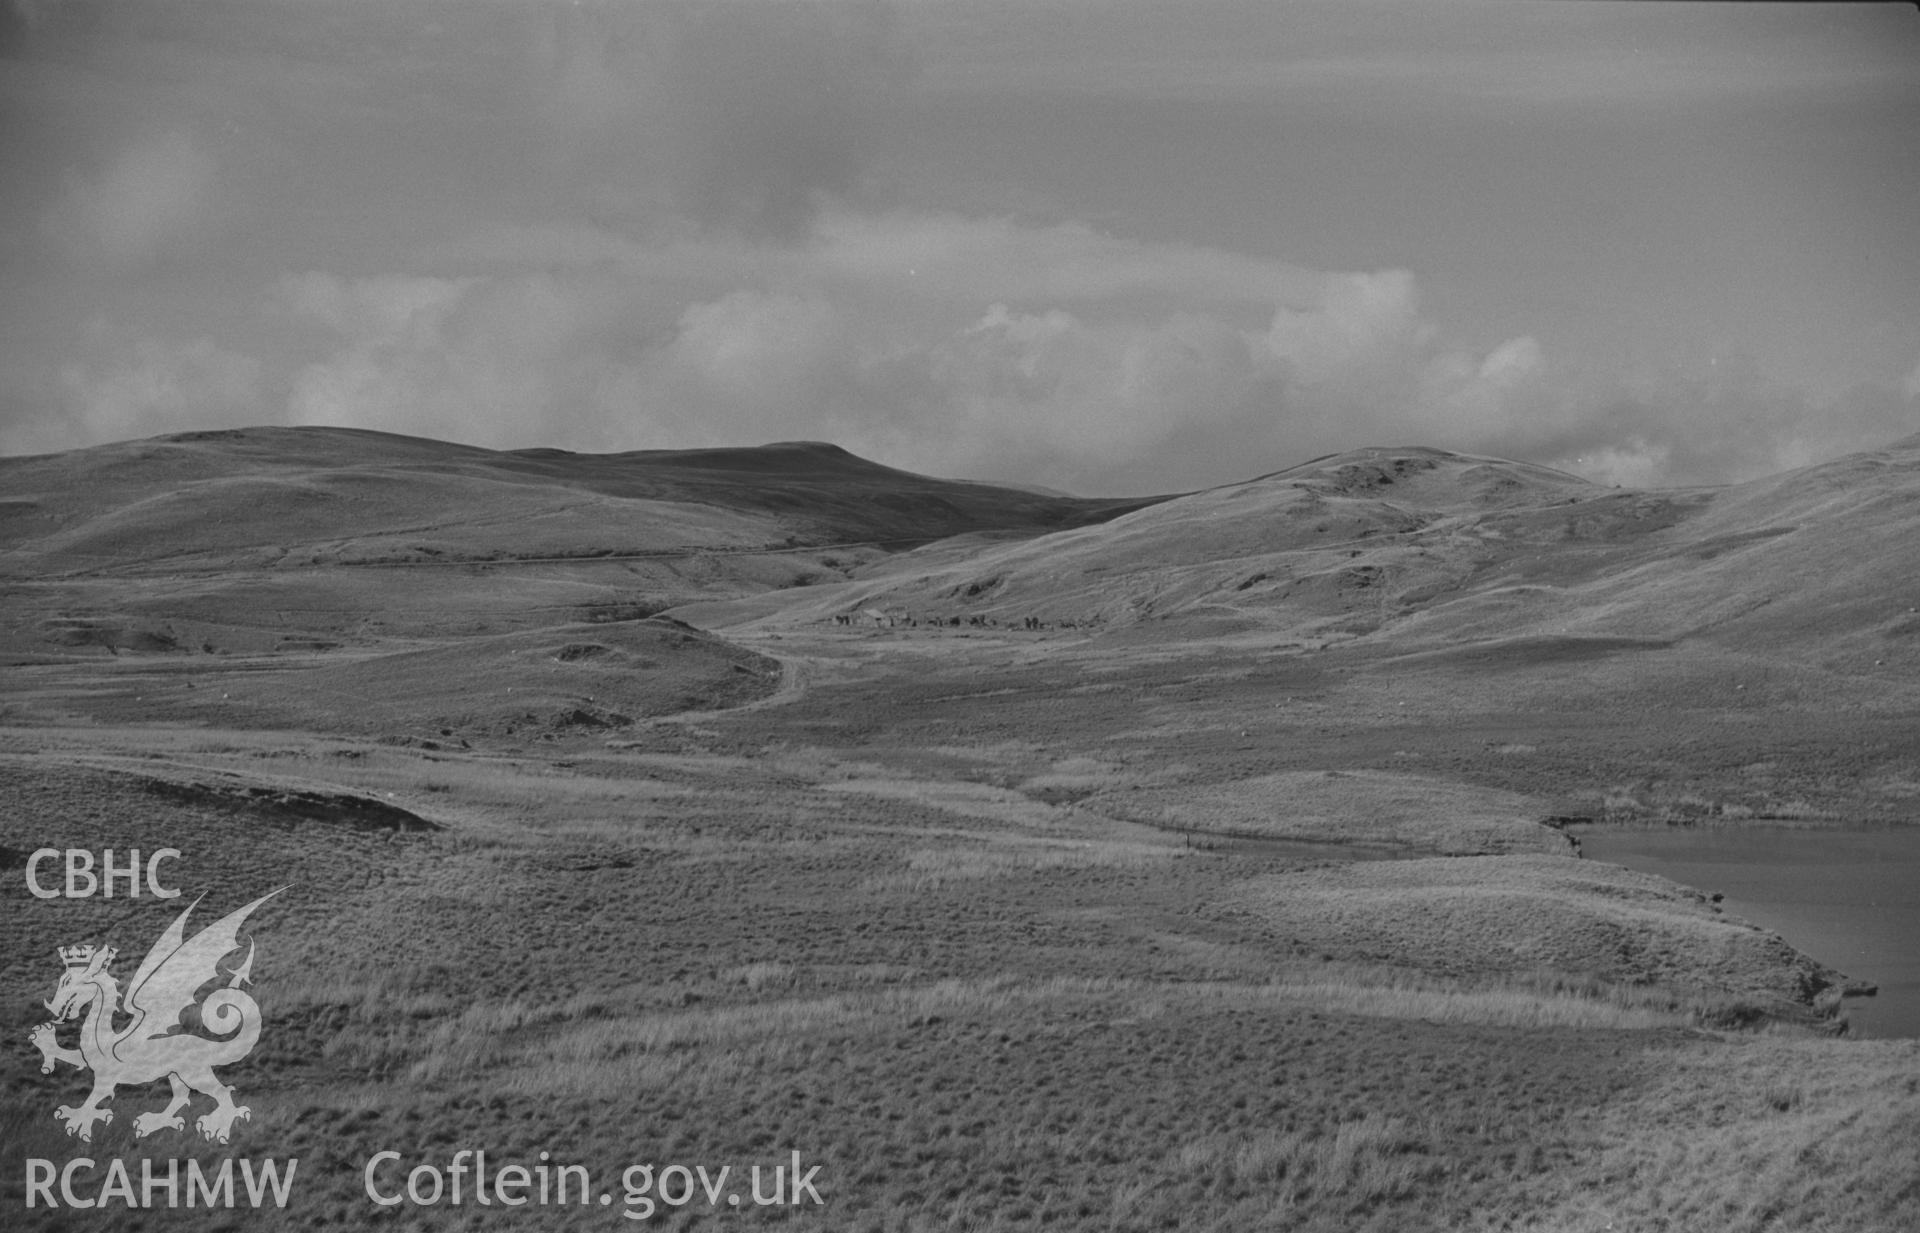 Digital copy of a black and white negative showing view from road by Waen Hesgog to long ruined building 500m south west of Esgair-Hir mine. Photographed by Arthur O. Chater on 29th August 1967 looking north from Grid Reference SN 728 903.